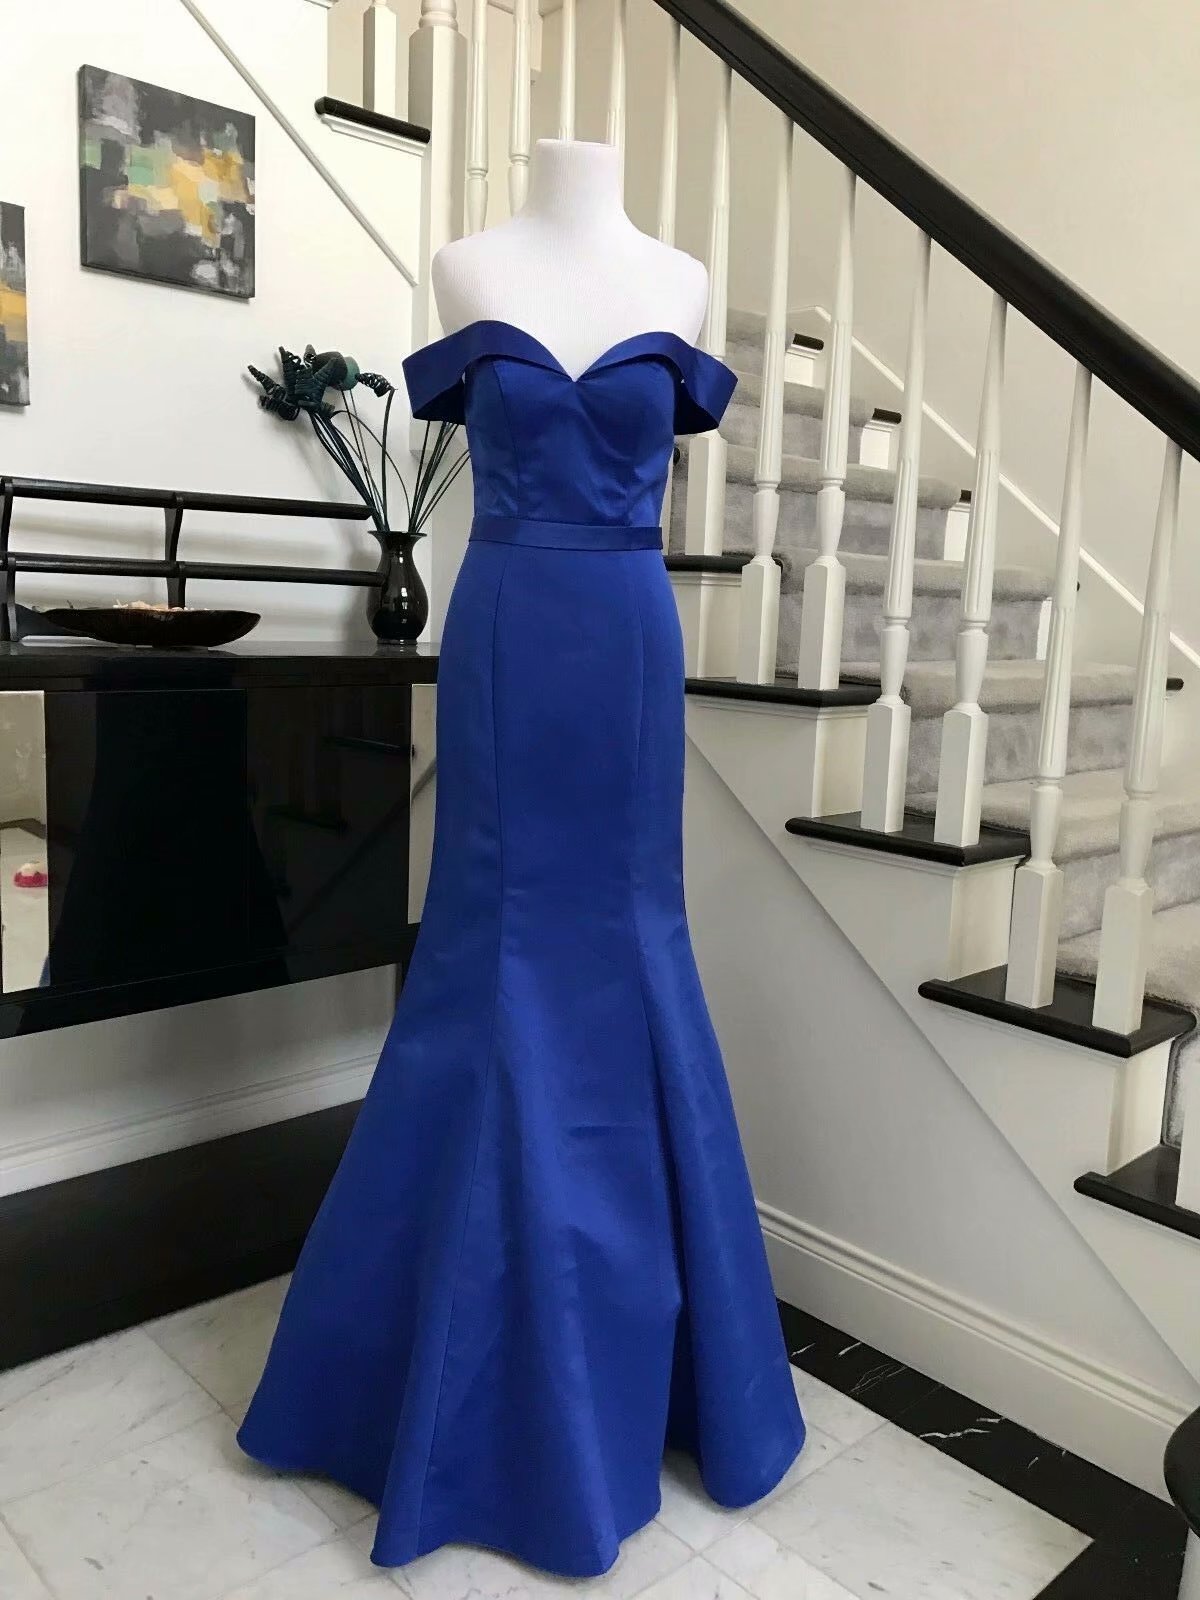 Fashion Mermaid Prom Dresses 2019 Satin Floor Length Off The Shoulder Royal Blue Evening Gowns